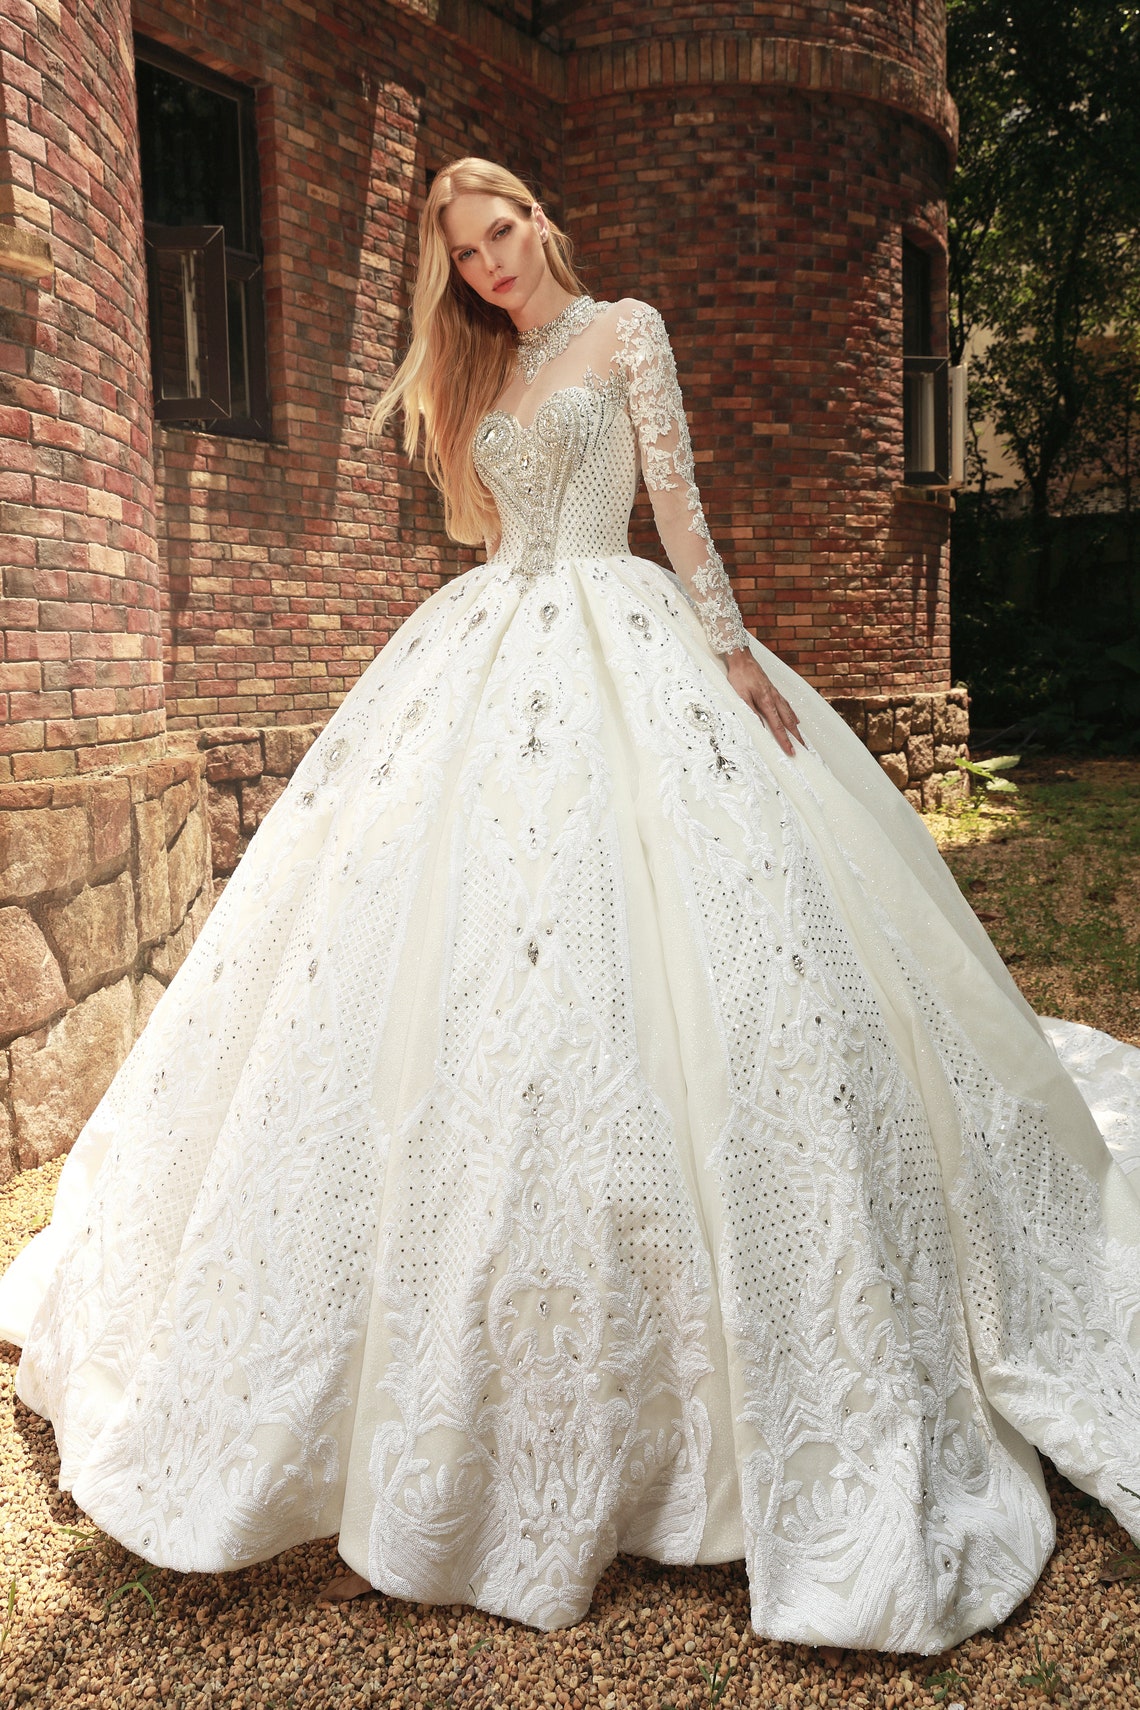 Off Shoulder Princess Big Ballgown Wedding Dress With Sequins, Lace  Applique, And Tulle Plus Size Bridal Gresses From Verycute, $63.42 |  DHgate.Com